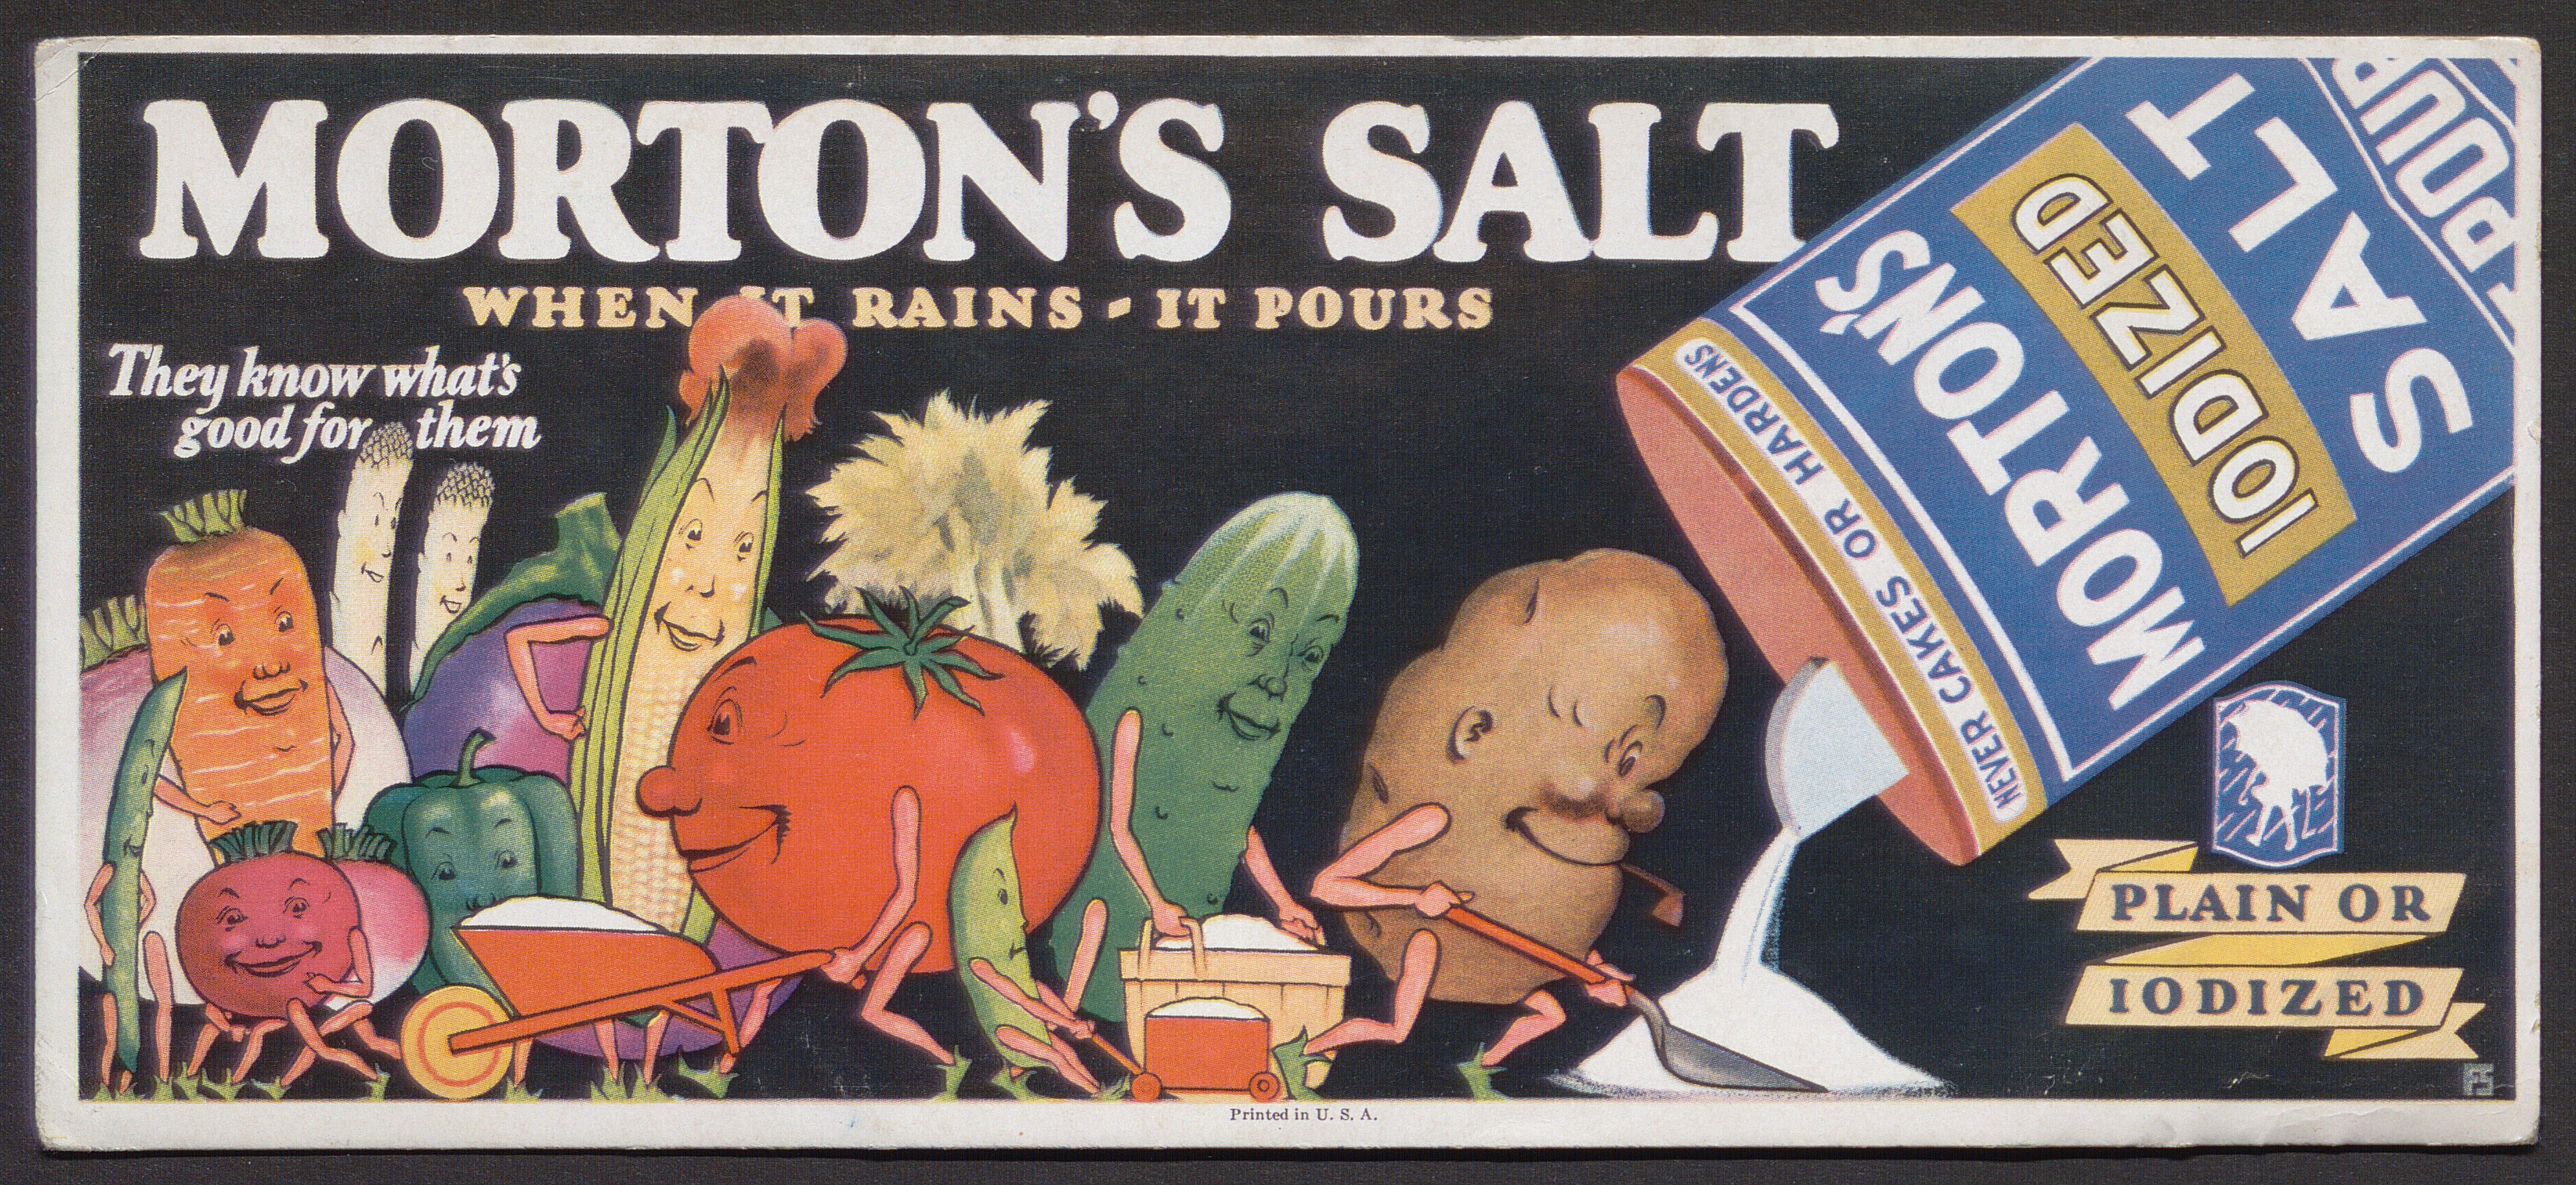 Advertising card for Morton's Salt. Features vegetables collecting salt from a pouring can.